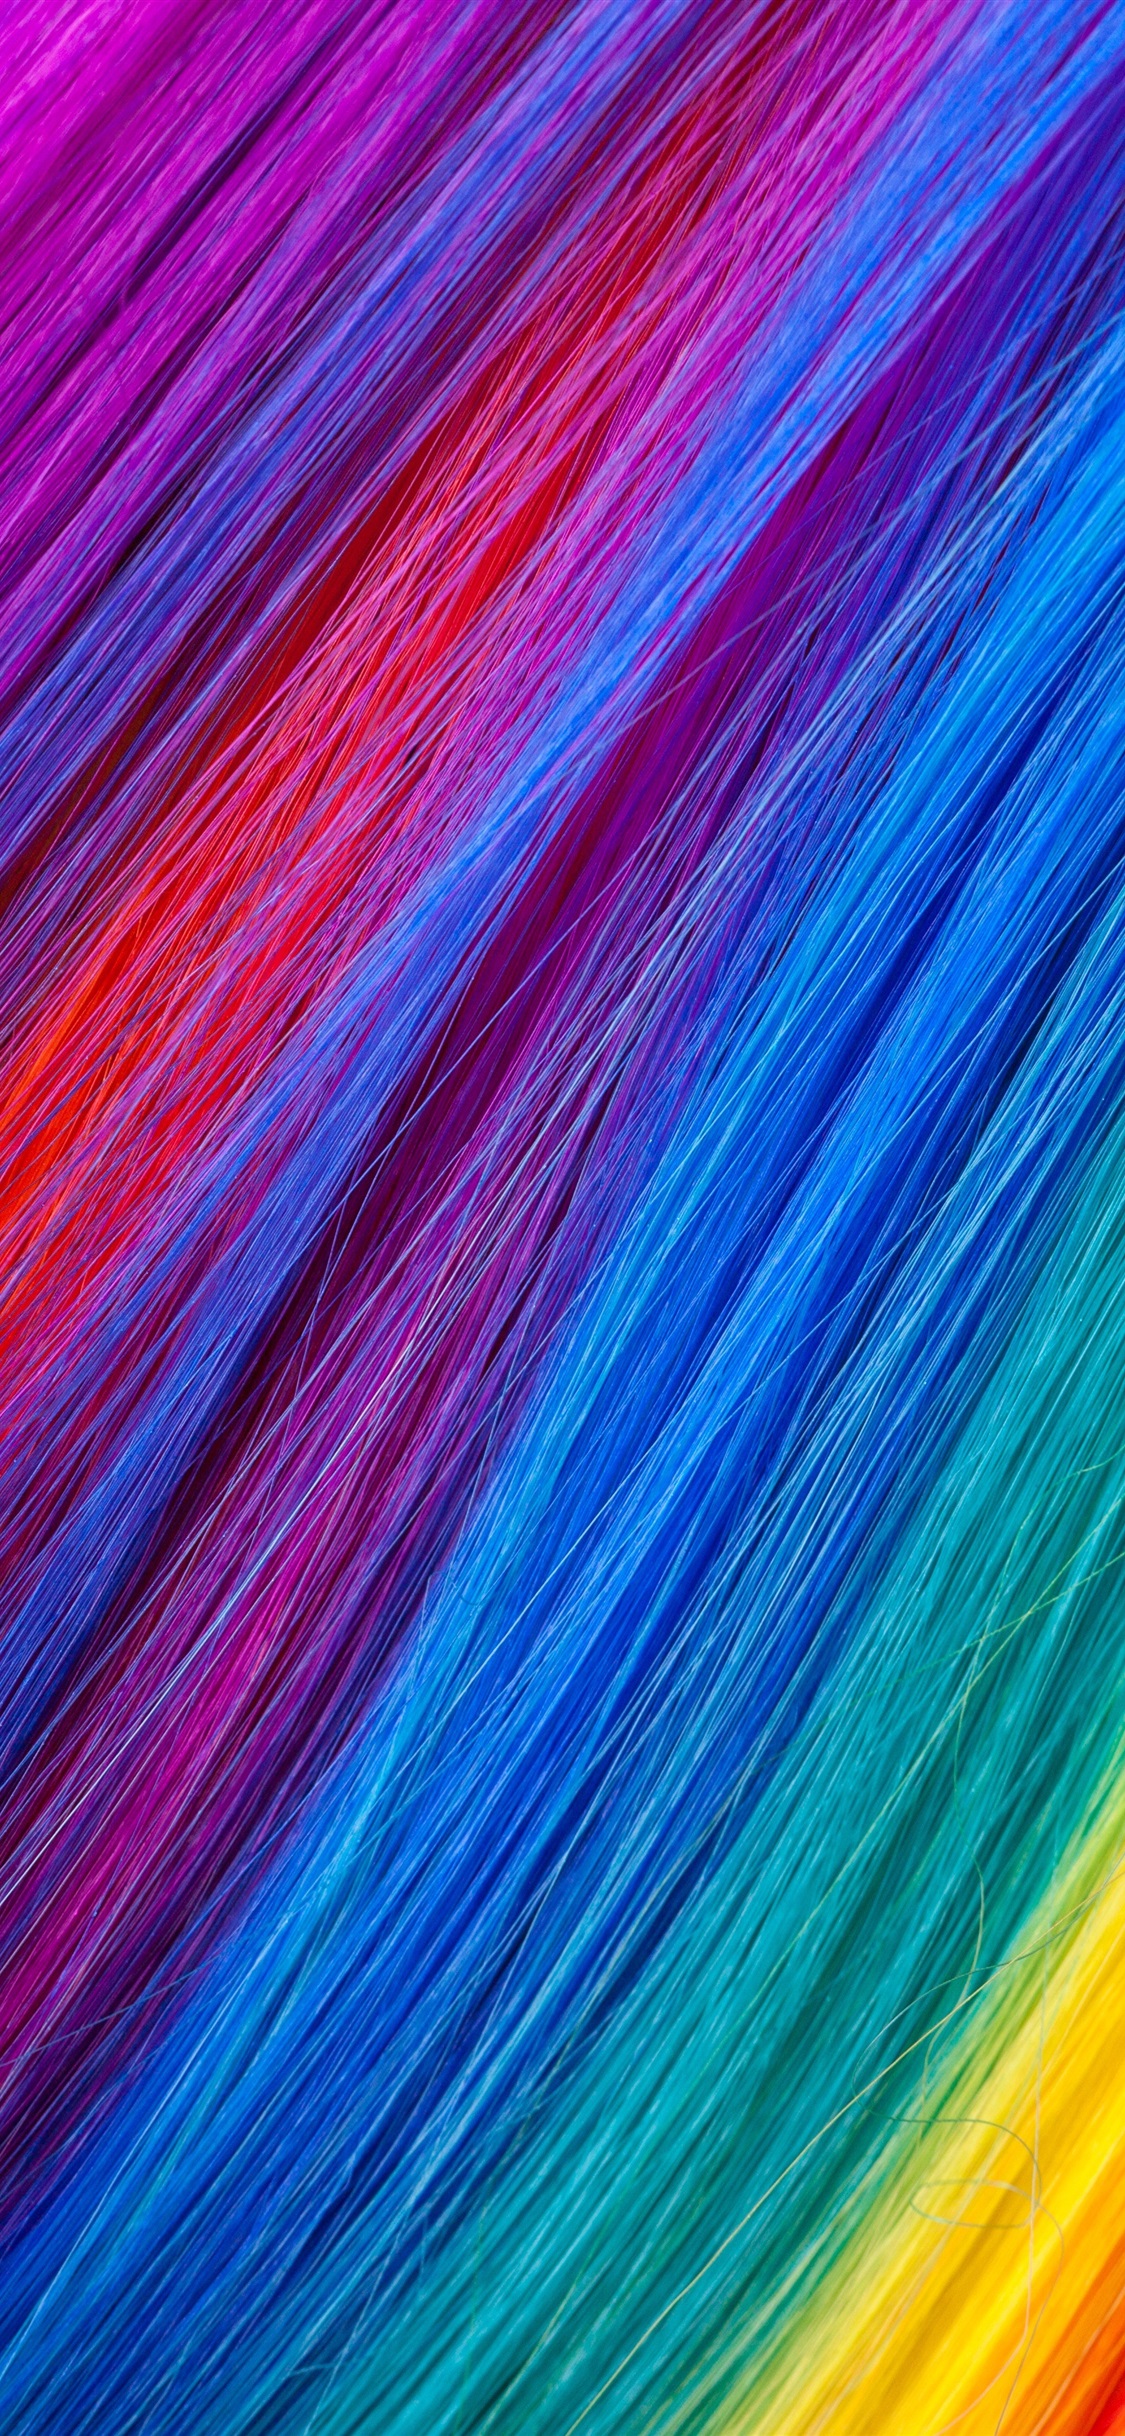 Iphone Wallpaper Rainbow Color Hairs - Colorful Threads - HD Wallpaper 